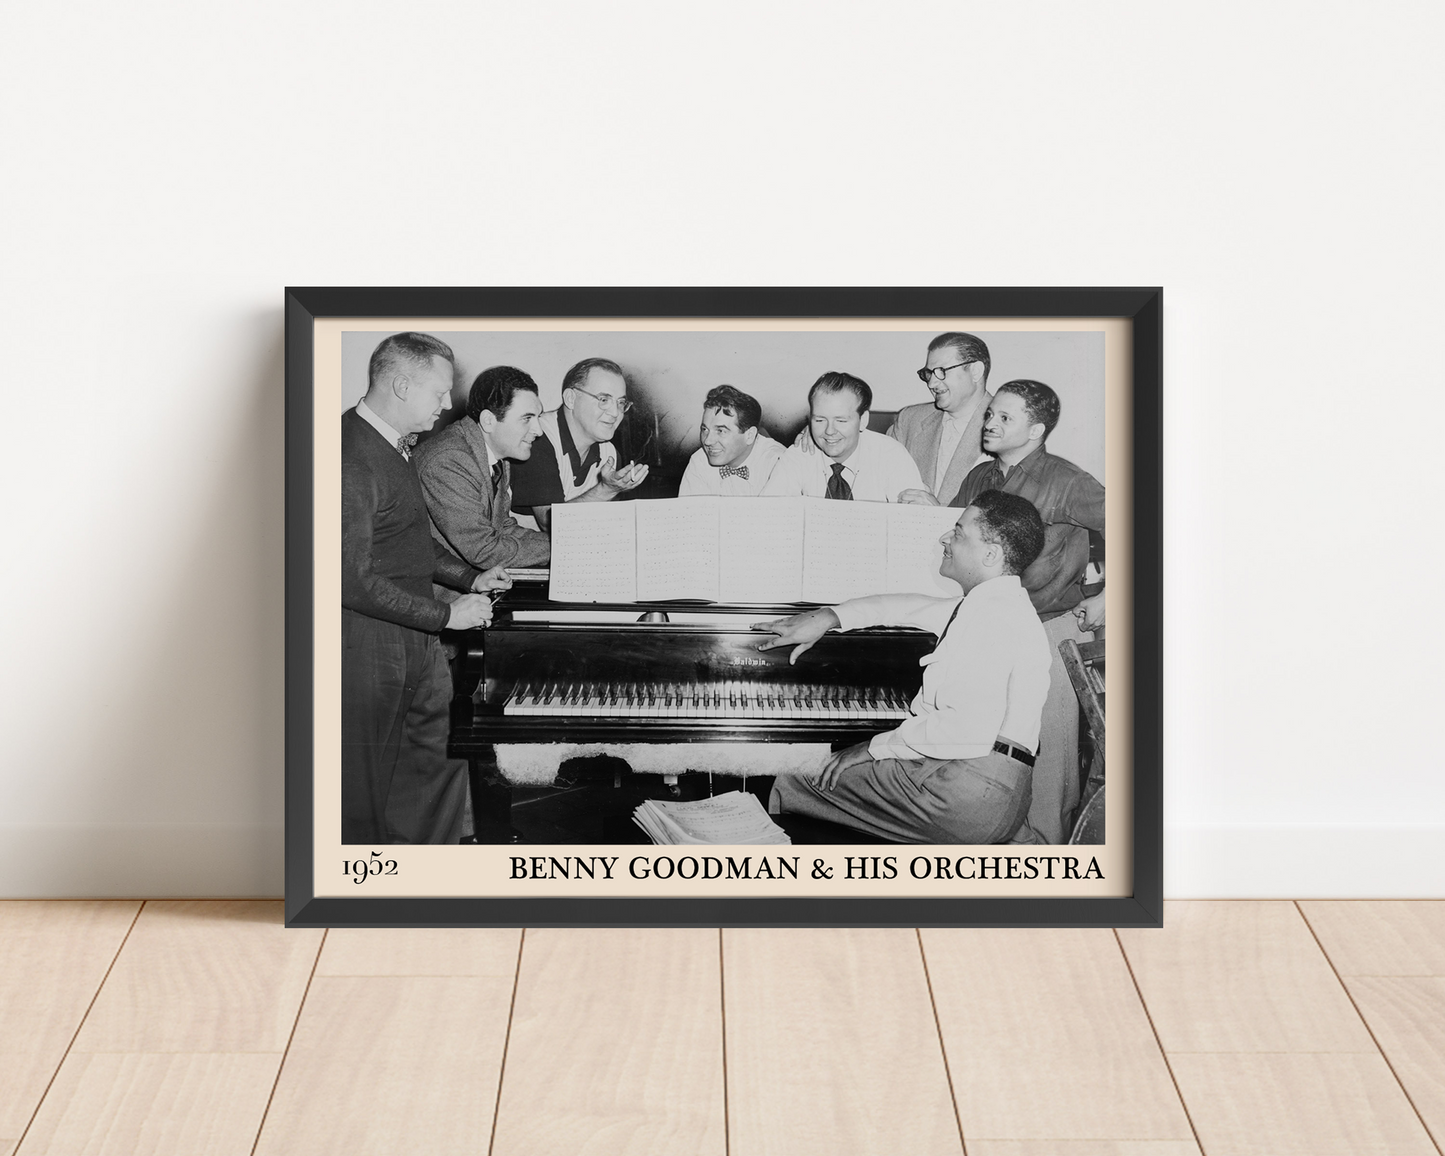 1952 photograph of Benny Goodman & his orchestra crafted into a black framed poster. The poster is resting on a white living room wall.